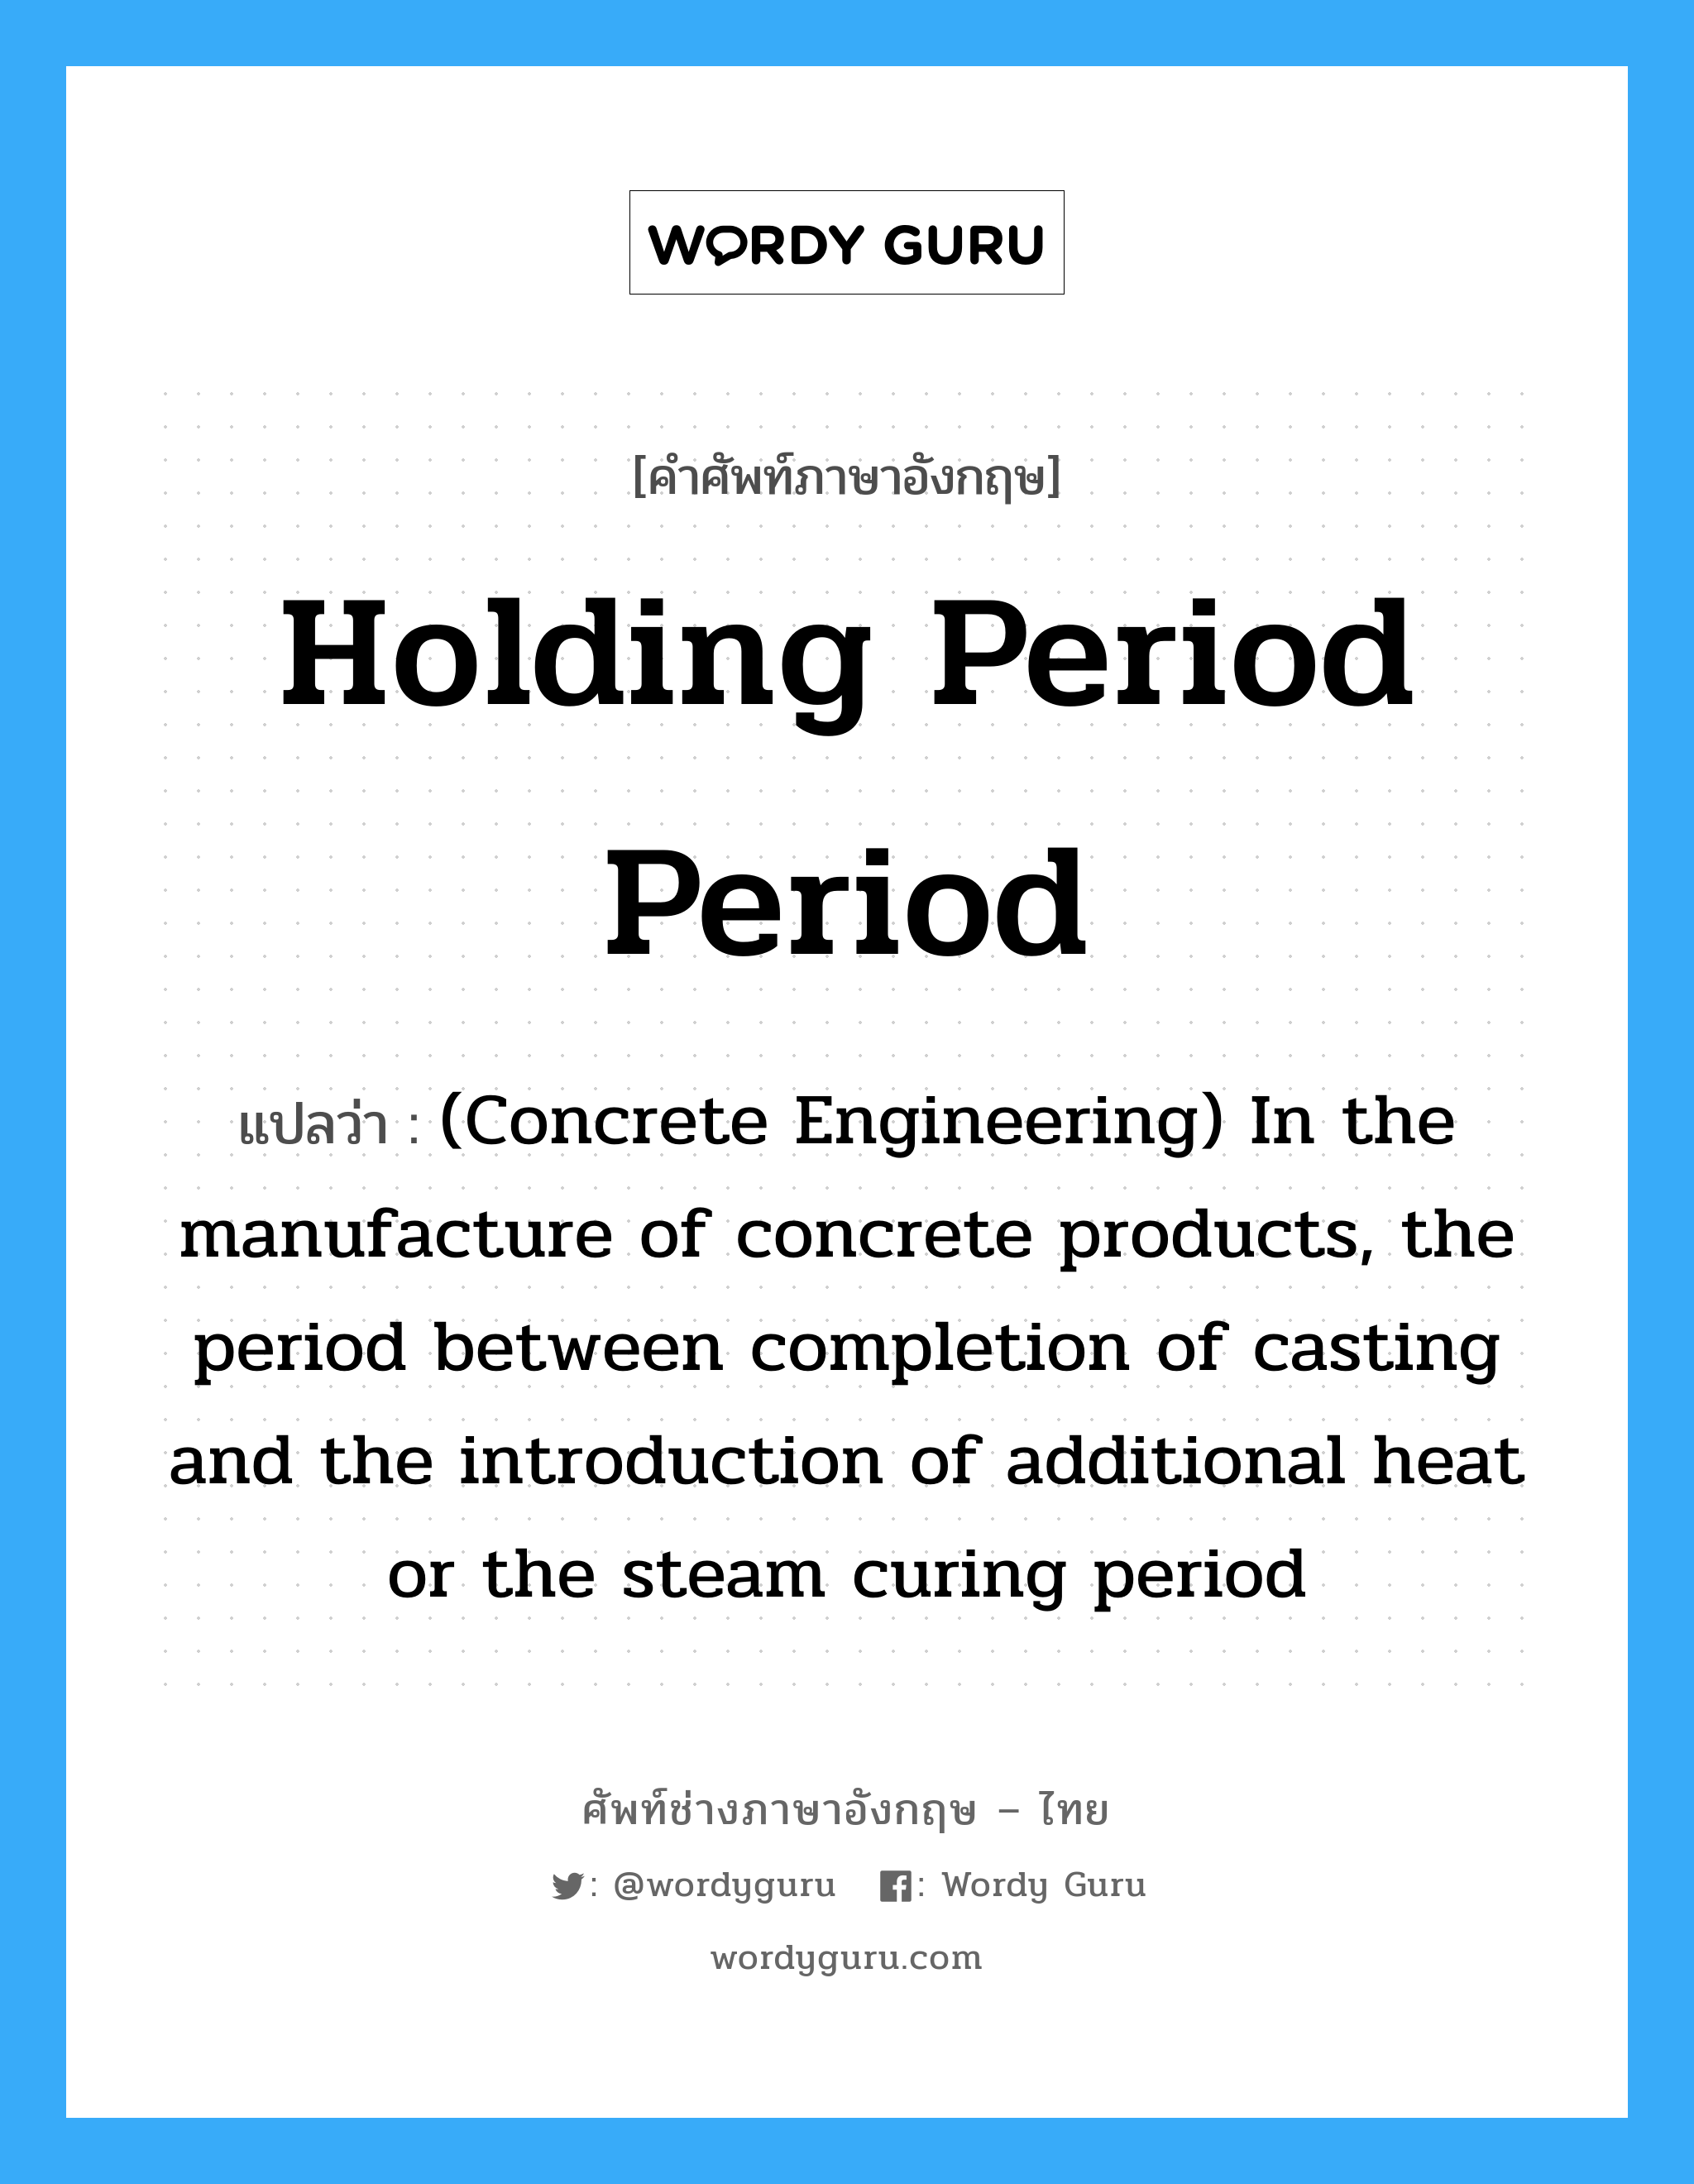 Holding Period Period แปลว่า?, คำศัพท์ช่างภาษาอังกฤษ - ไทย Holding Period Period คำศัพท์ภาษาอังกฤษ Holding Period Period แปลว่า (Concrete Engineering) In the manufacture of concrete products, the period between completion of casting and the introduction of additional heat or the steam curing period